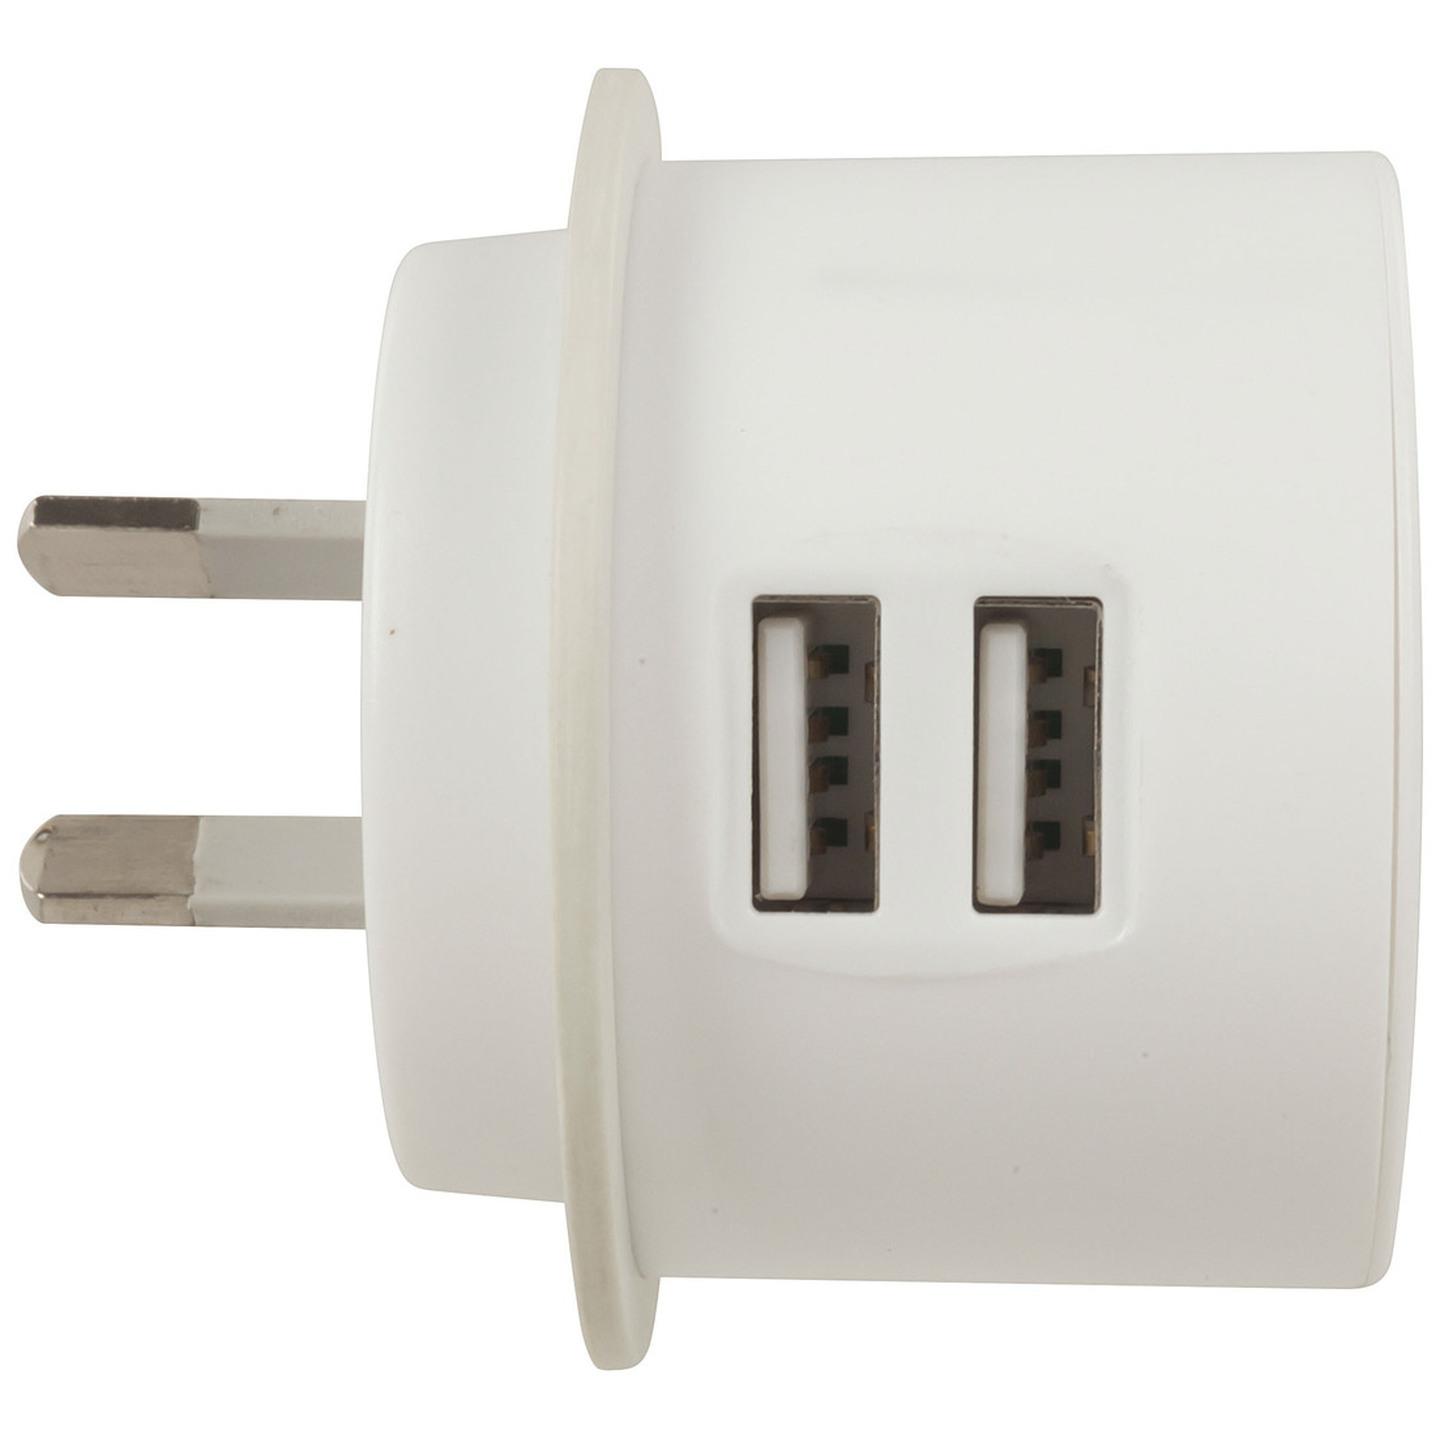 Dual USB Wall Charger with LED Night Light